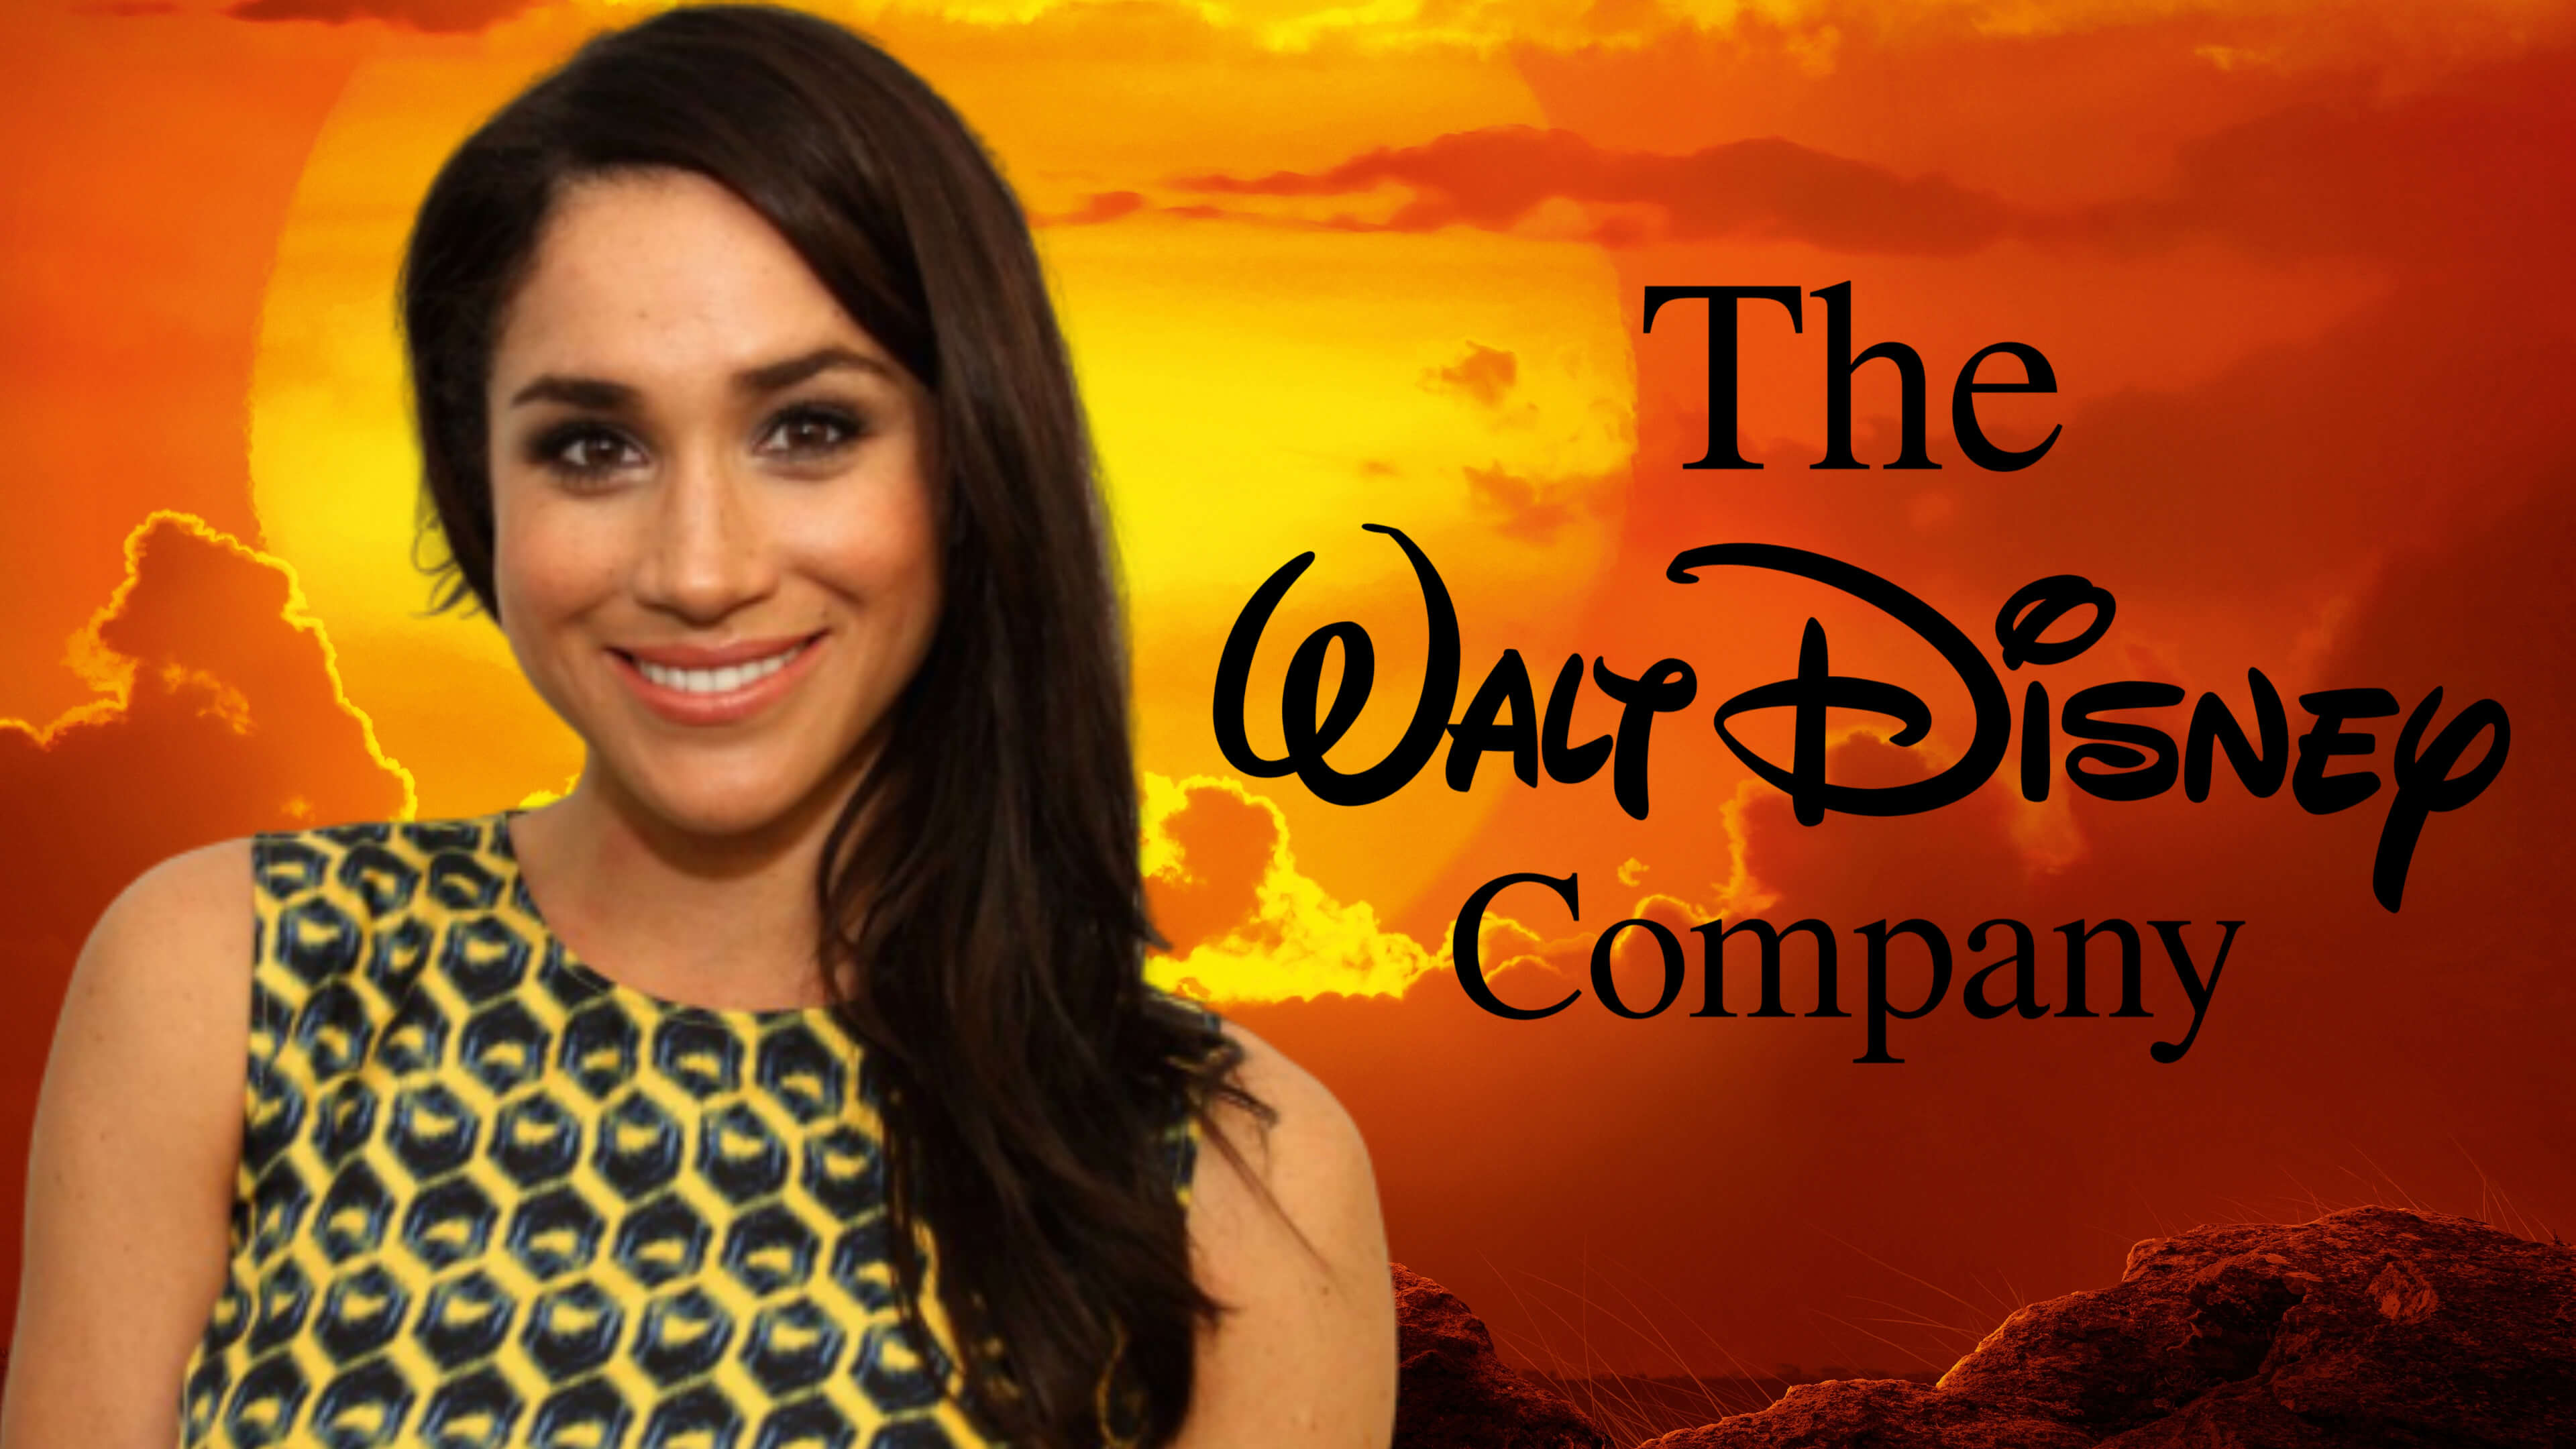 Meghan Markle Signs Voiceover Deal With Disney